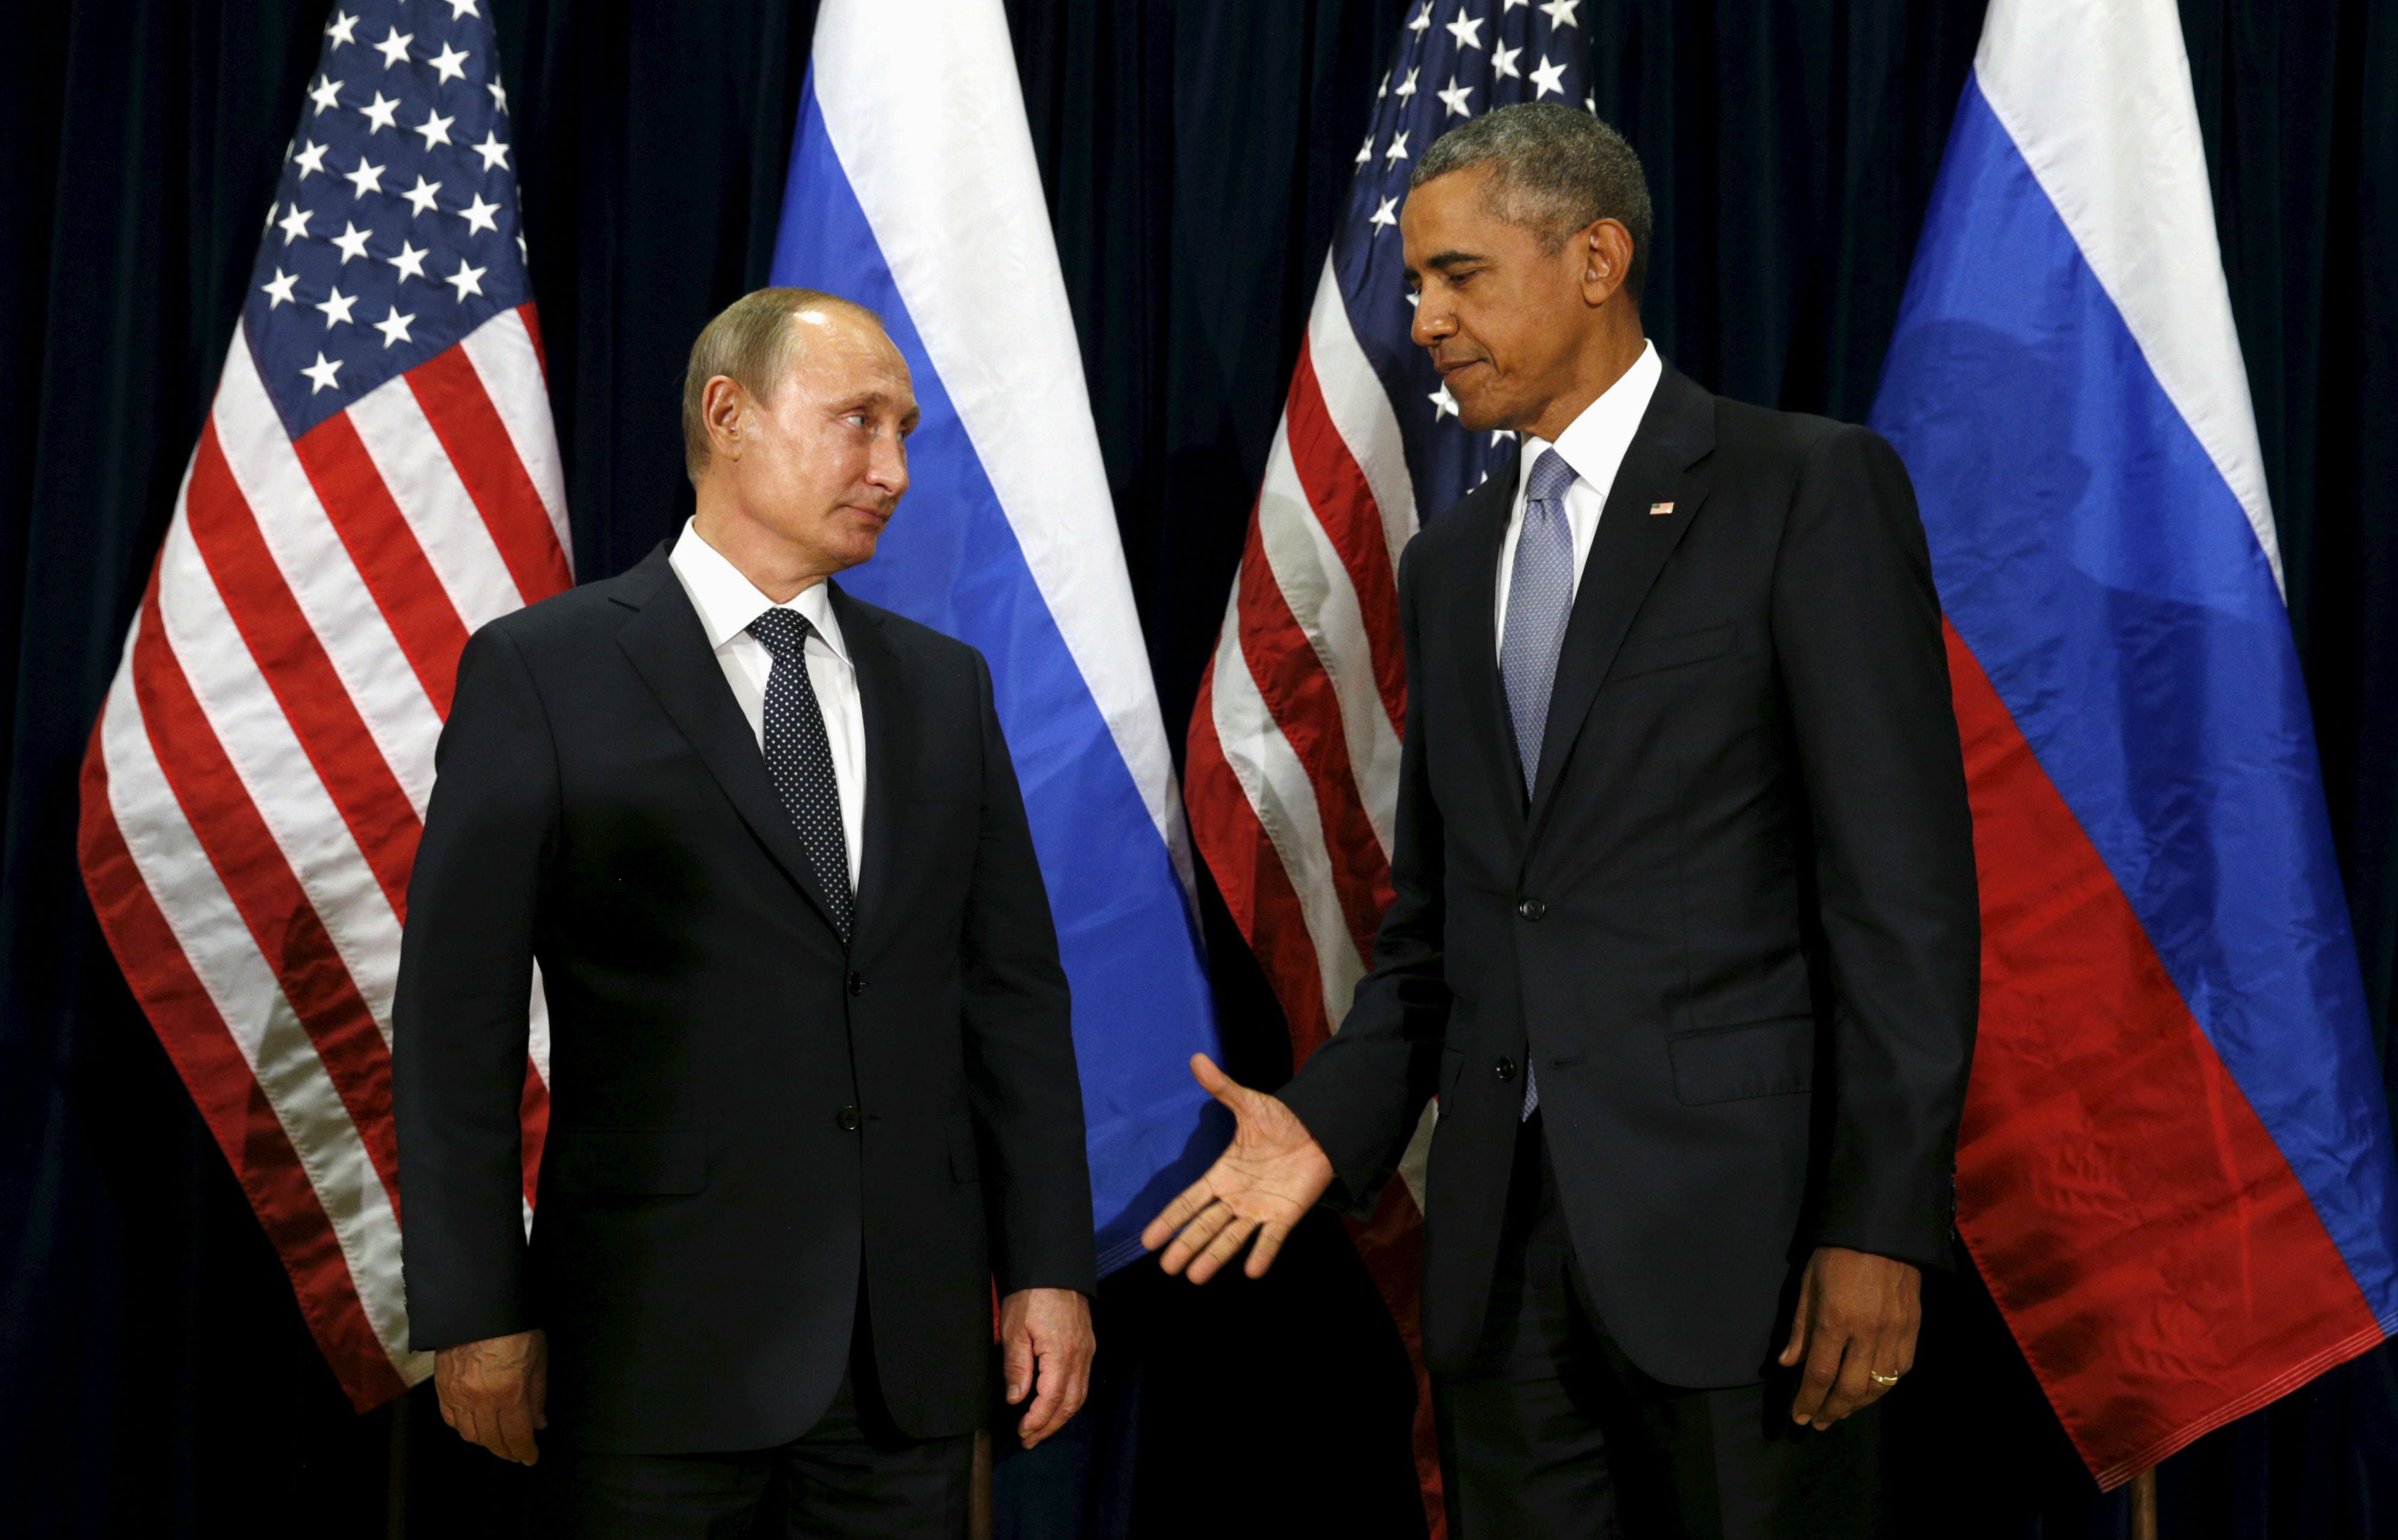 President Obama and President Putin met privately at the UN after clashing on Syria